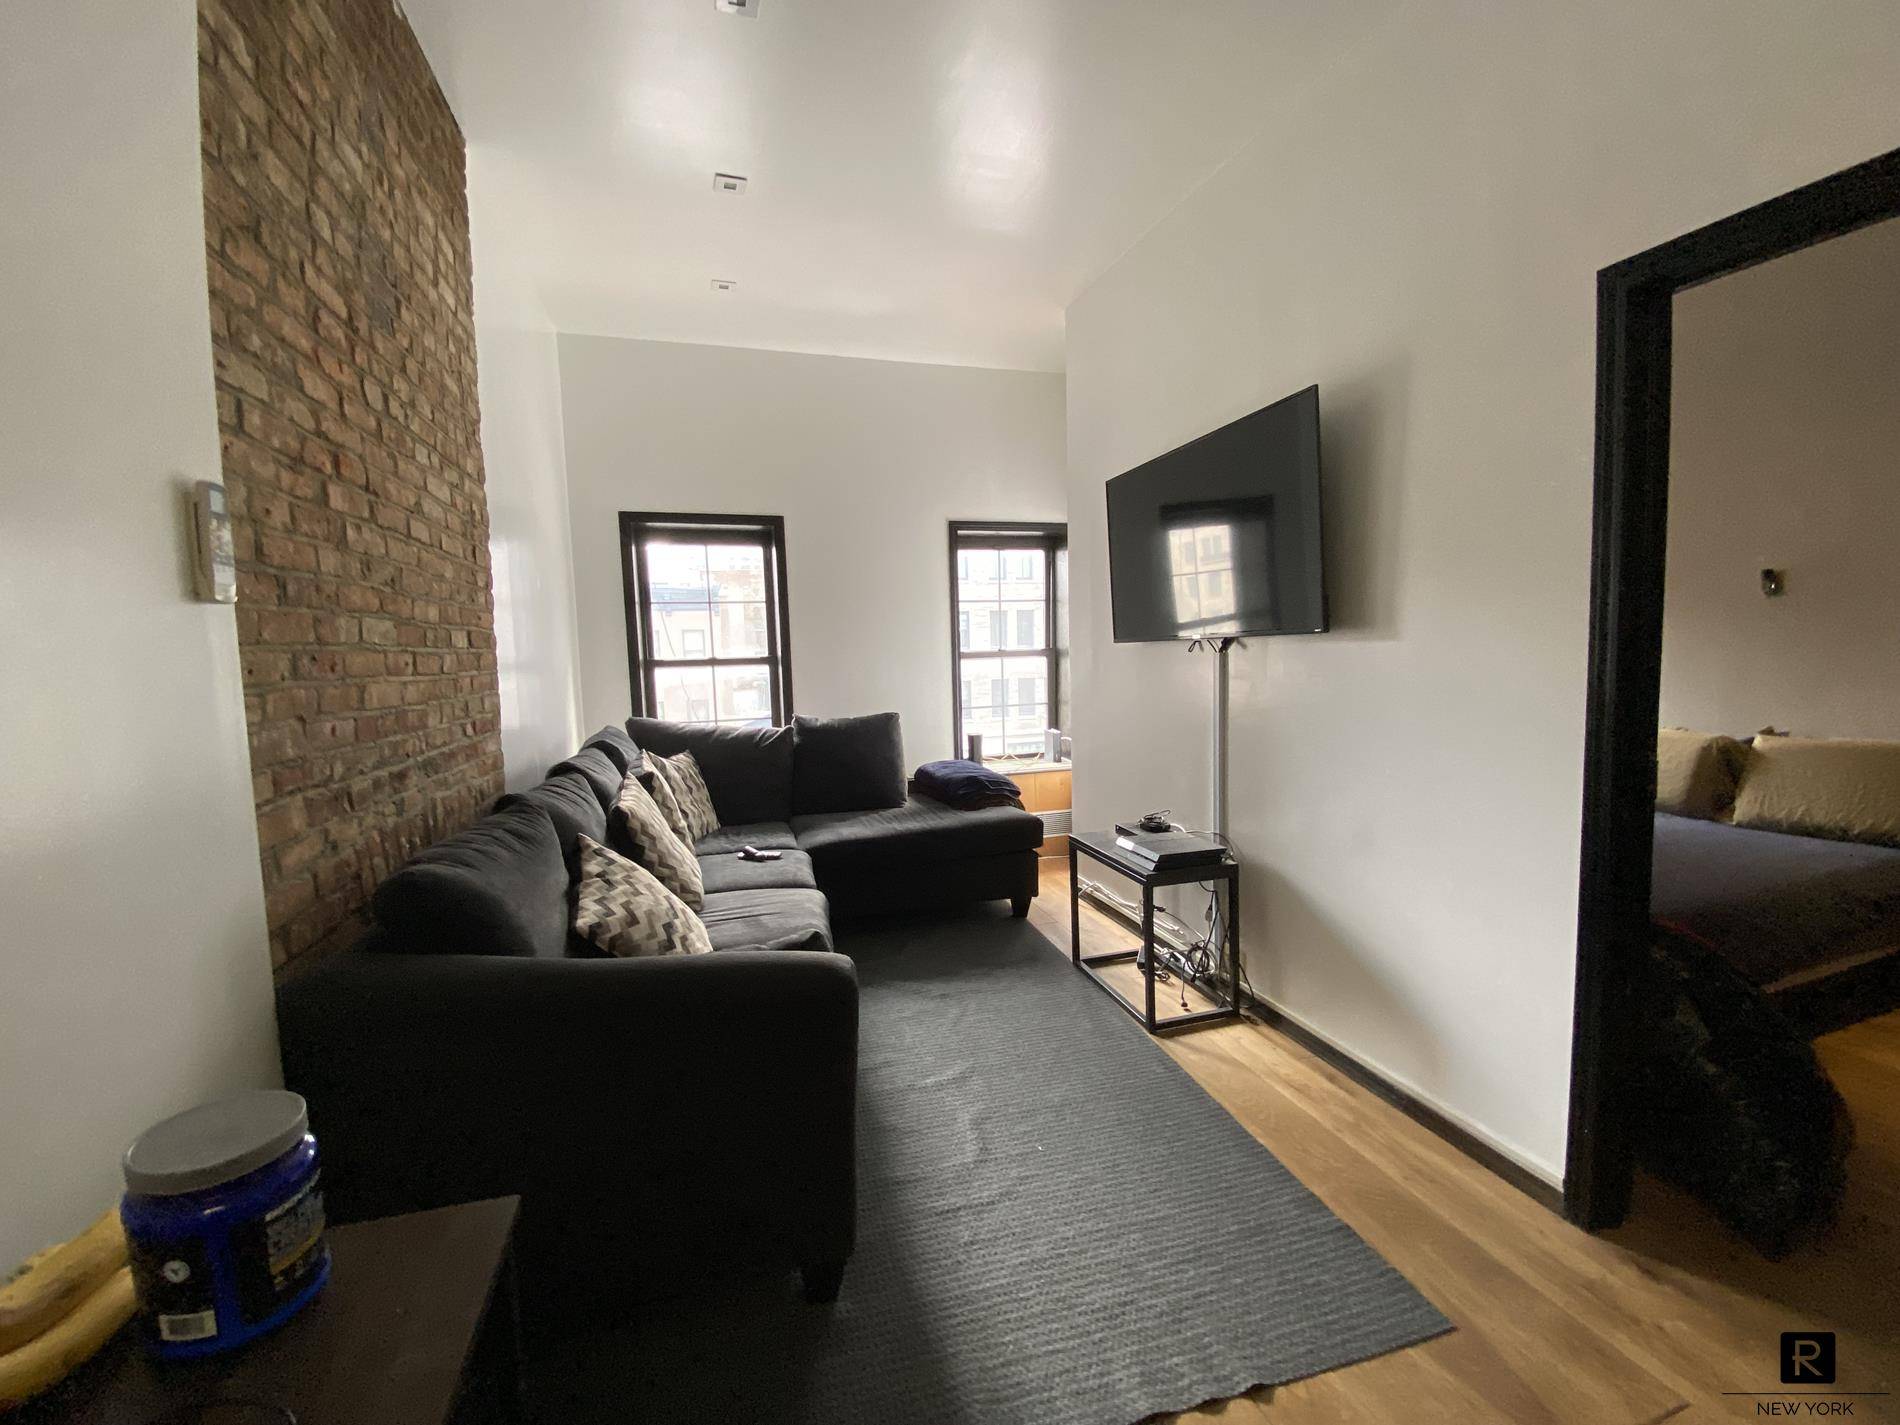 Full floor massive 2 bedroom and 1 bath apartment in the heart of the Upper East Side on 81st Street and 2nd Ave.